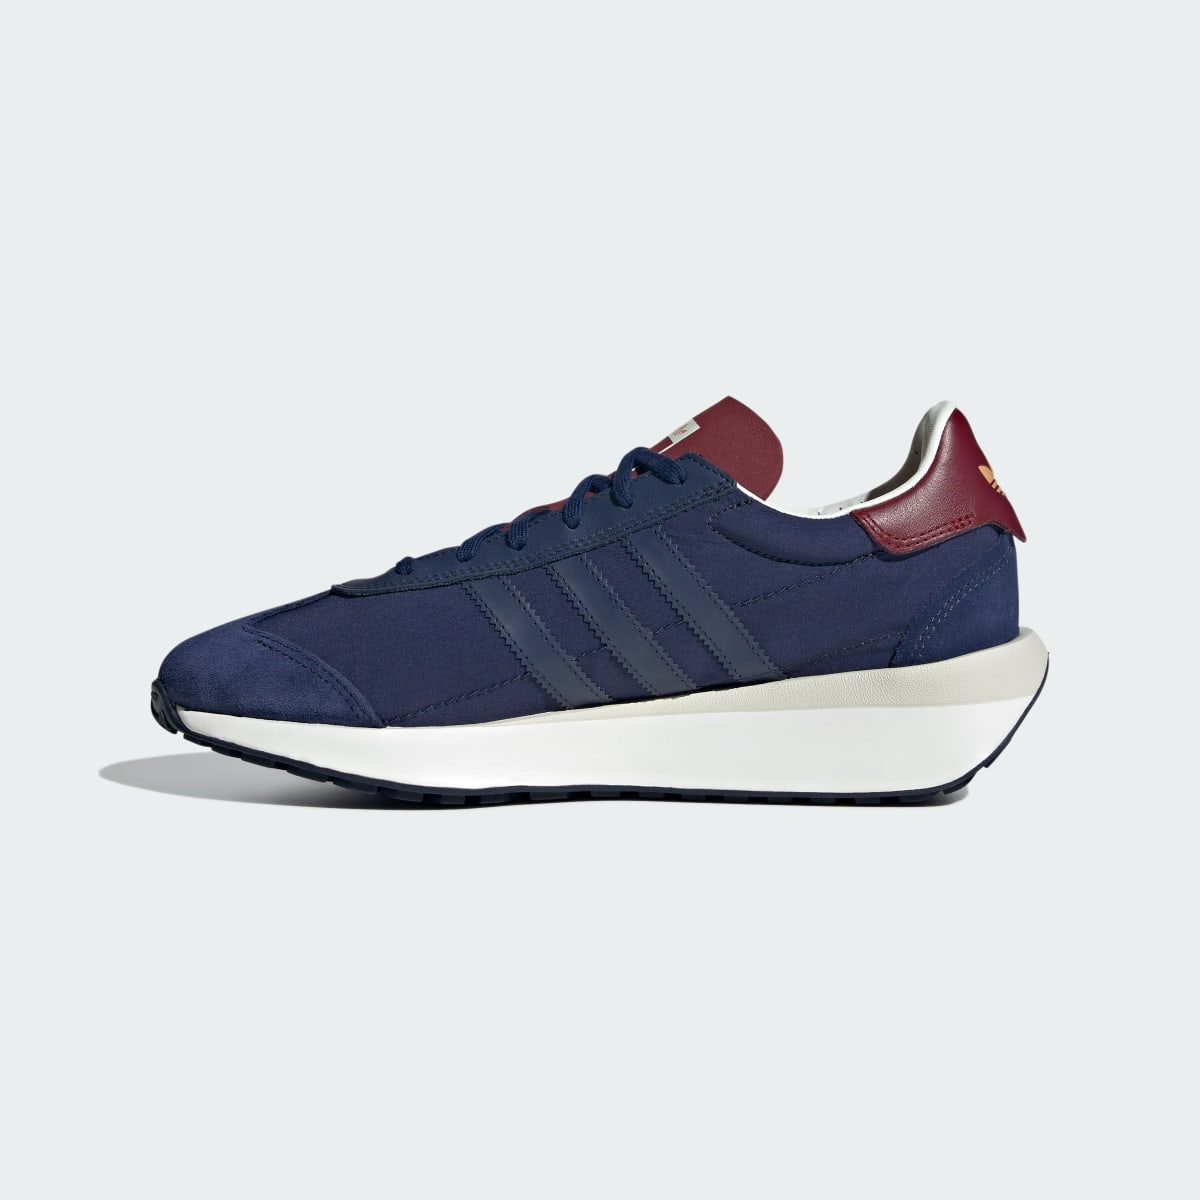 Adidas Country XLG Shoes. 10